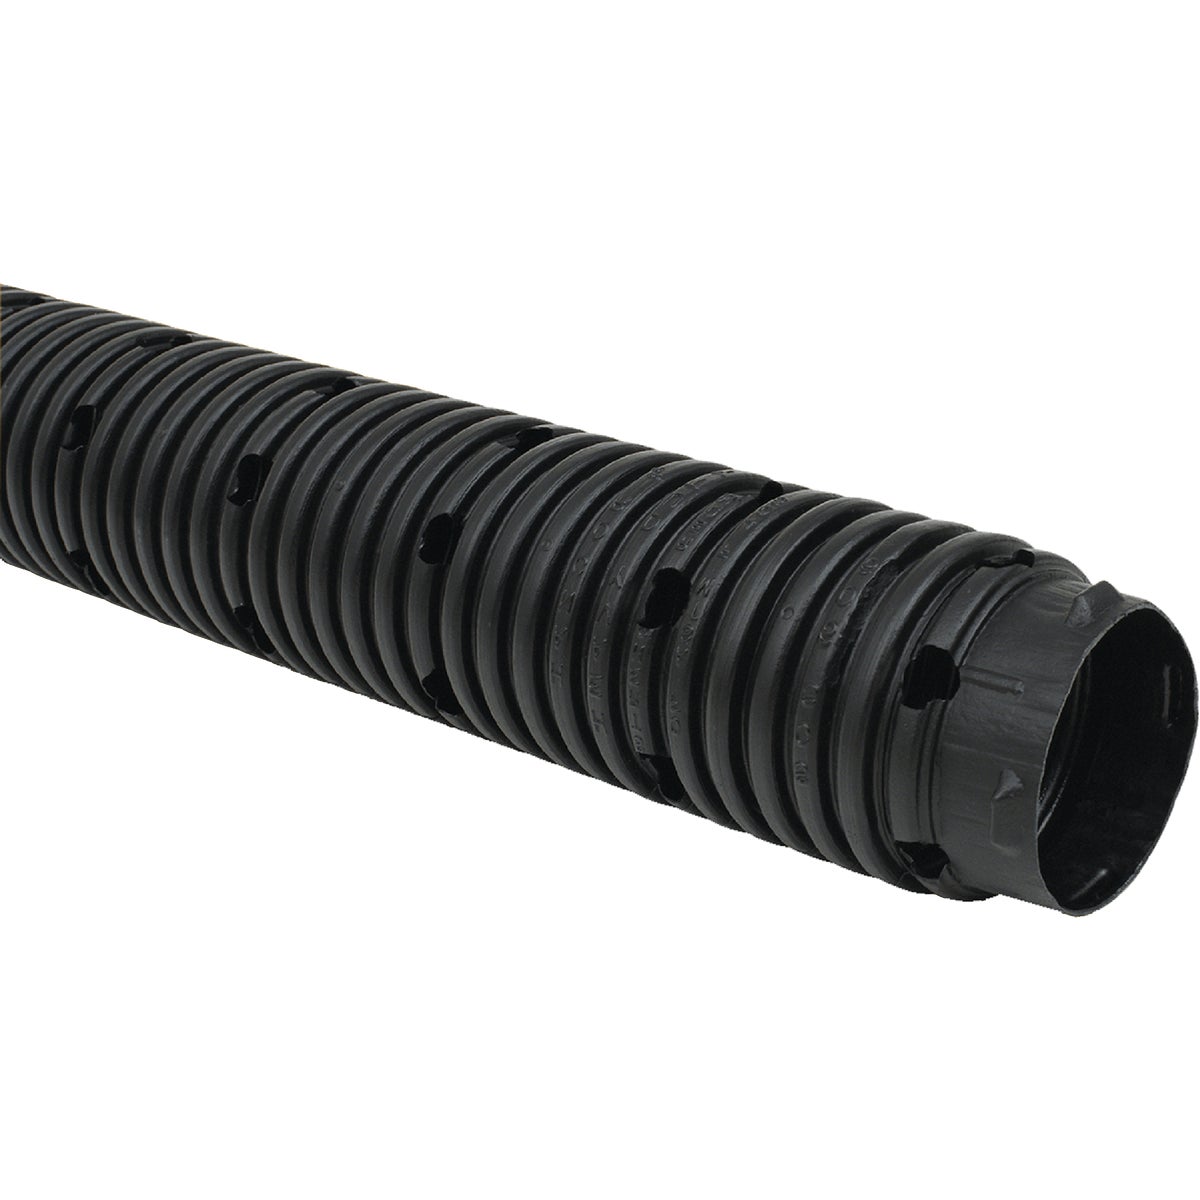 Advanced Drainage Systems 4 In. X 10 Ft. Polyethylene Corrugated Septic Pipe